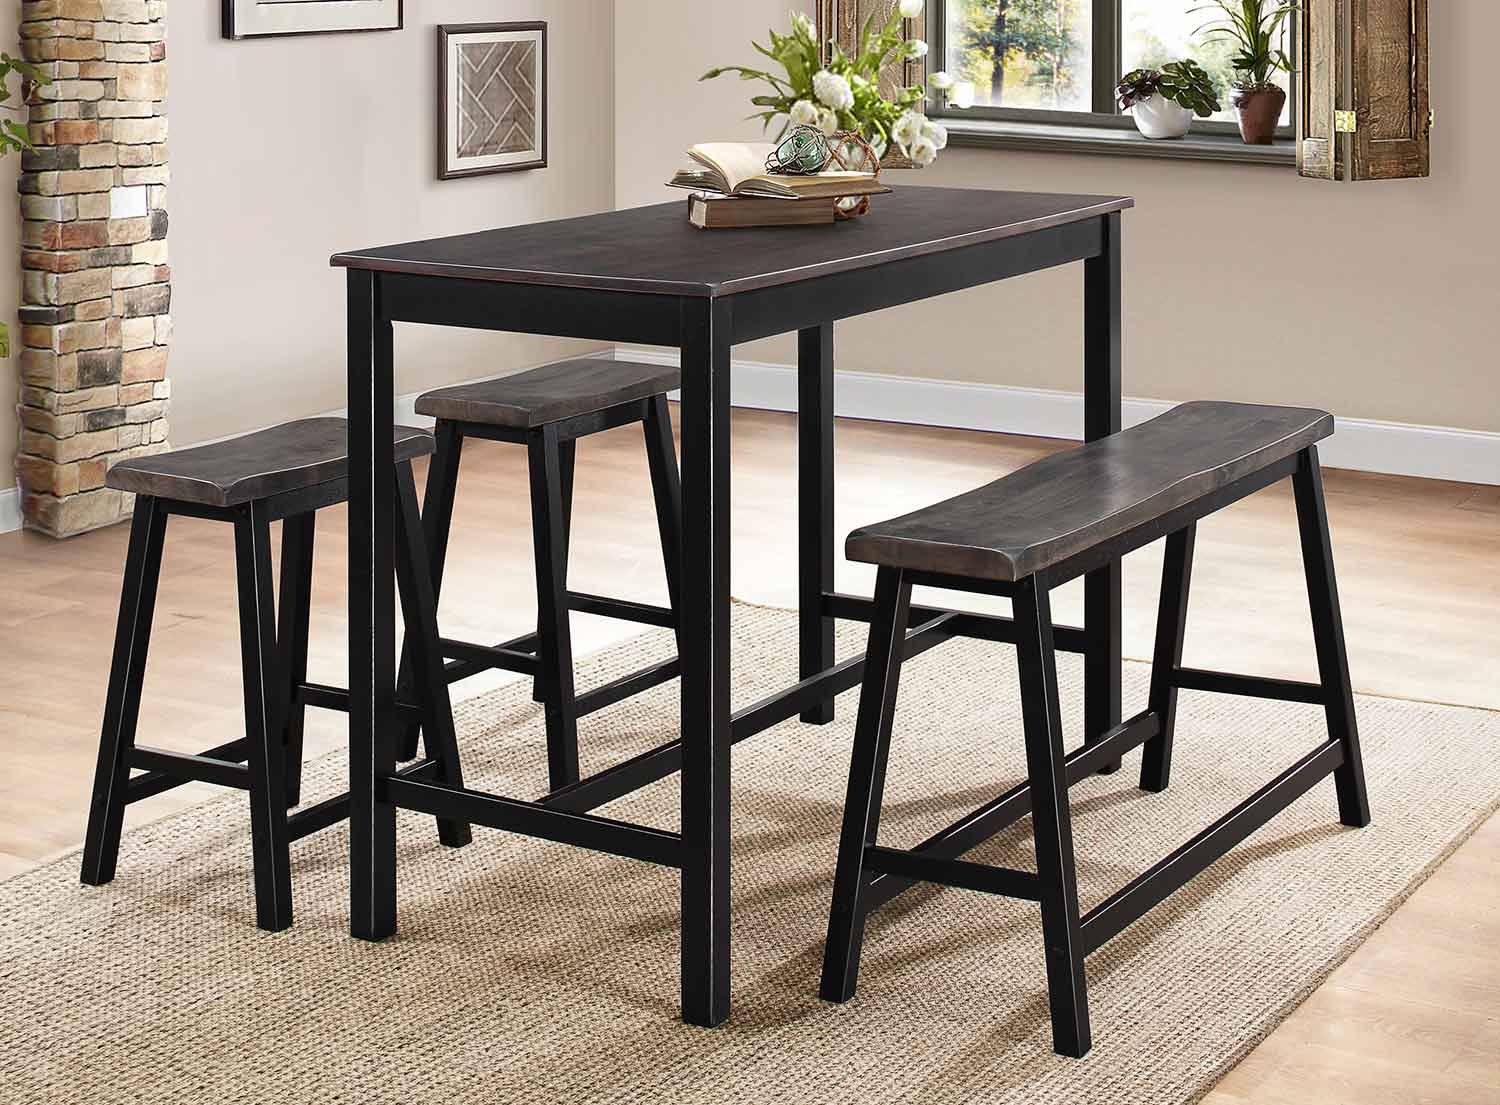 Homelegance Visby 4-Piece Pack Counter Height Set - Brown